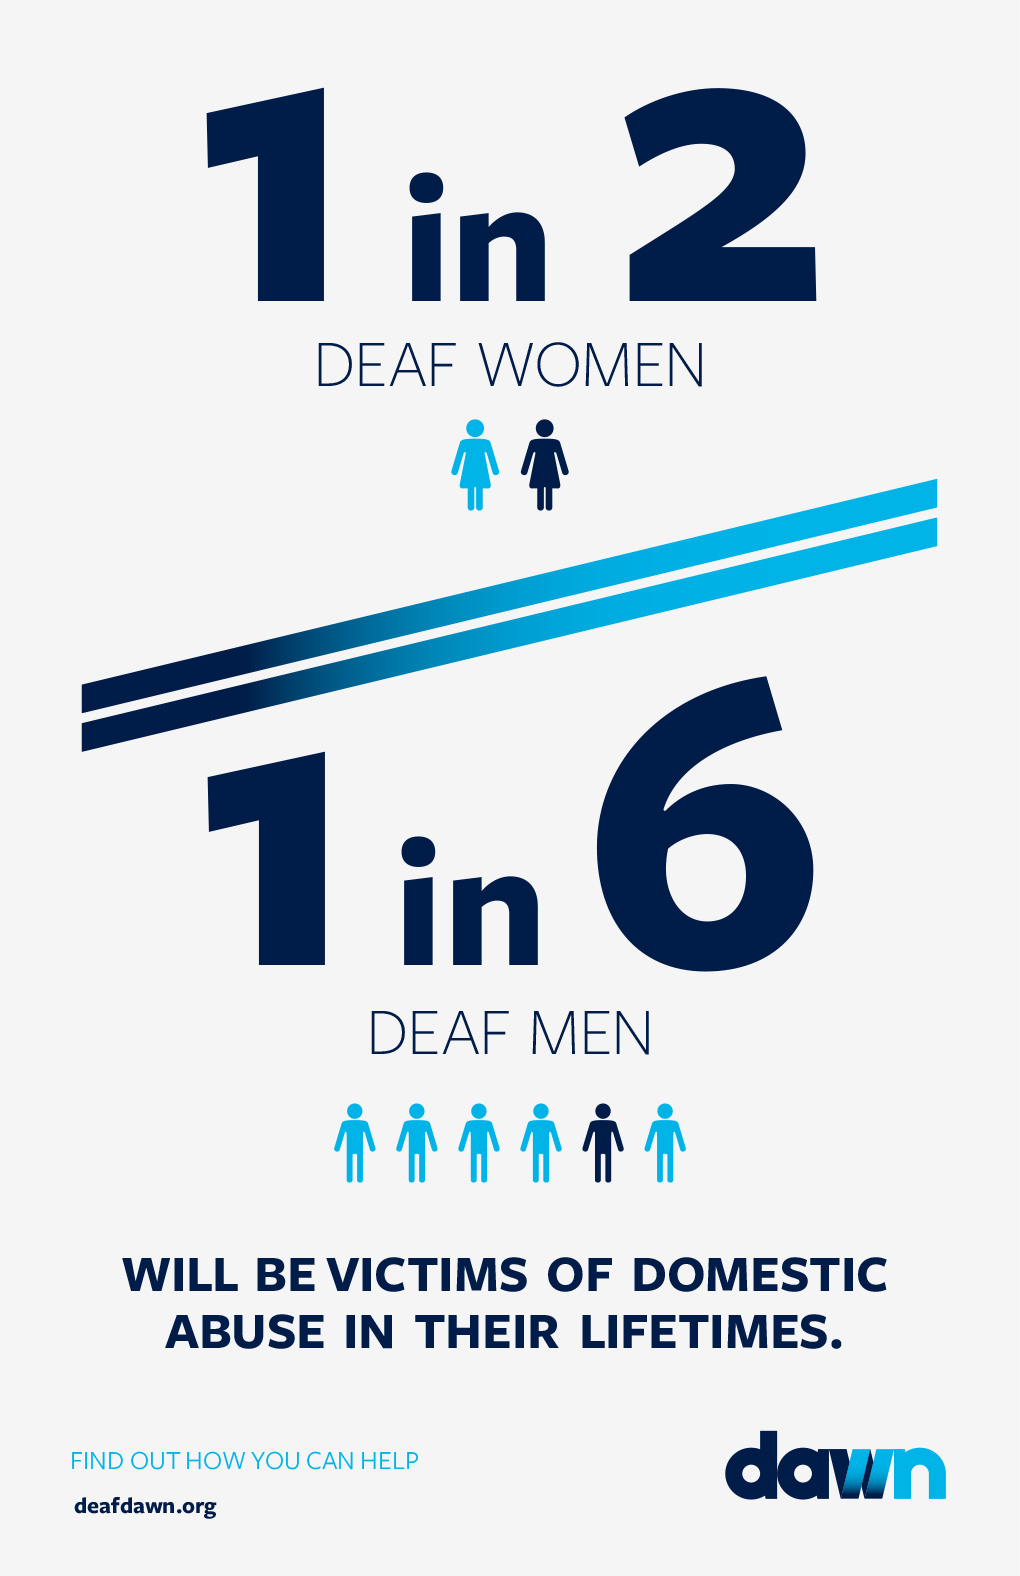 An illustrated poster with the text, 1 in 2 deaf woman and 1 in 6 deaf men will be victims of domestic abuse in their lifetimes.